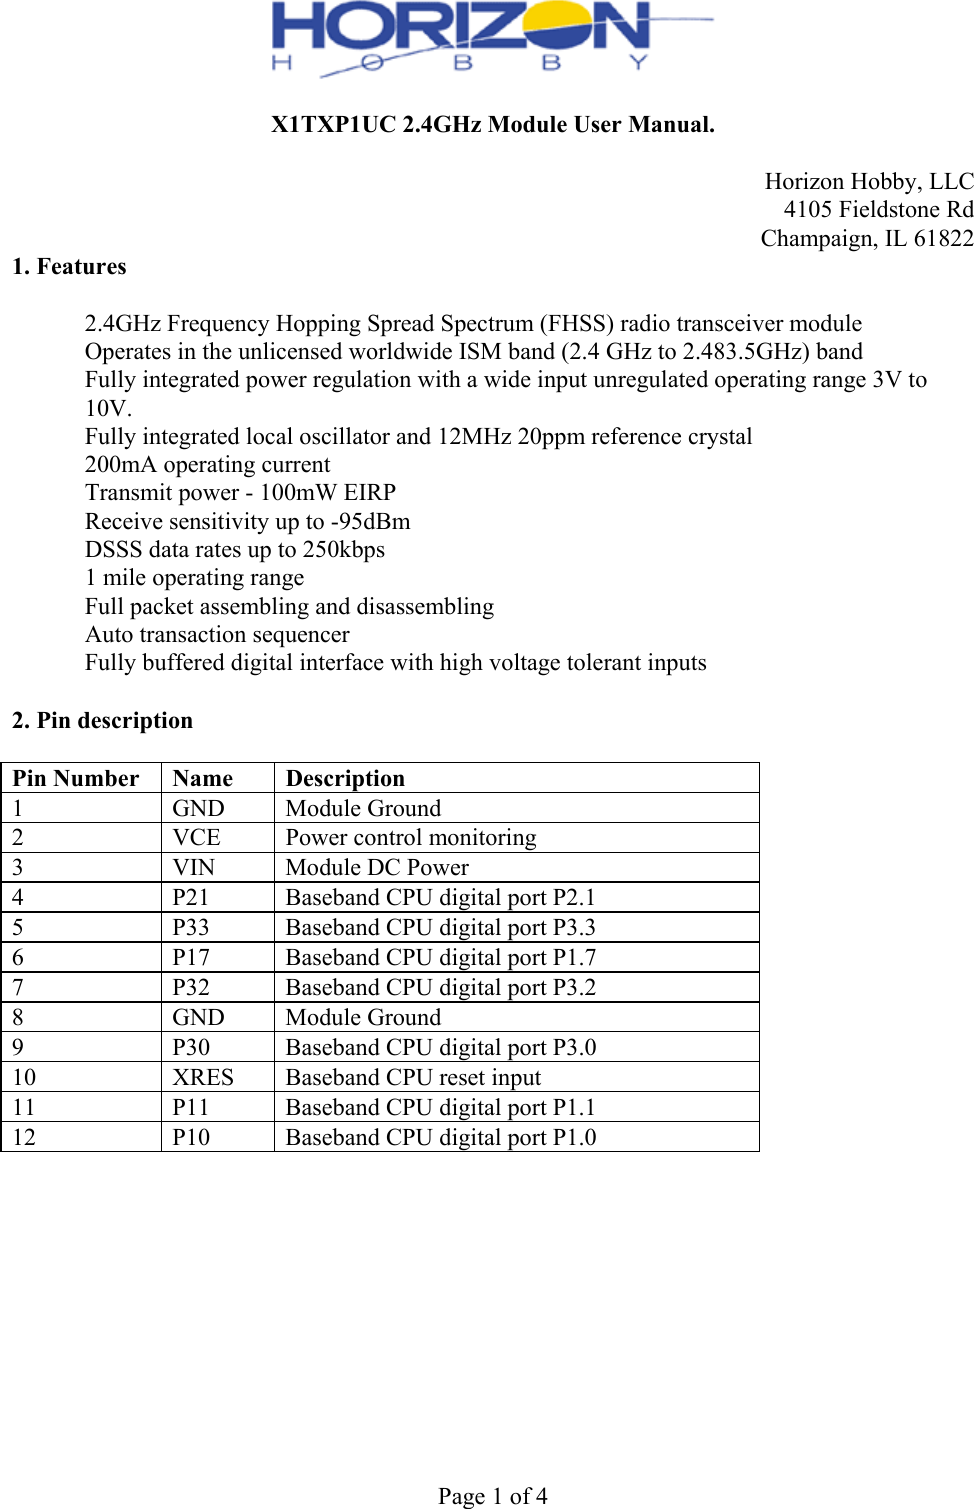  Page 1 of 4  X1TXP1UC 2.4GHz Module User Manual.  Horizon Hobby, LLC  4105 Fieldstone Rd Champaign, IL 61822 1. Features  　  2.4GHz Frequency Hopping Spread Spectrum (FHSS) radio transceiver module 　  Operates in the unlicensed worldwide ISM band (2.4 GHz to 2.483.5GHz) band 　  Fully integrated power regulation with a wide input unregulated operating range 3V to 10V. 　  Fully integrated local oscillator and 12MHz 20ppm reference crystal 　  200mA operating current 　  Transmit power - 100mW EIRP 　  Receive sensitivity up to -95dBm 　  DSSS data rates up to 250kbps 　  1 mile operating range 　  Full packet assembling and disassembling 　  Auto transaction sequencer 　  Fully buffered digital interface with high voltage tolerant inputs  2. Pin description  Pin Number  Name Description1  GND  Module Ground 2  VCE  Power control monitoring 3  VIN  Module DC Power 4  P21  Baseband CPU digital port P2.15  P33  Baseband CPU digital port P3.3 6  P17  Baseband CPU digital port P1.7 7  P32  Baseband CPU digital port P3.2 8  GND  Module Ground9  P30  Baseband CPU digital port P3.0 10  XRES  Baseband CPU reset input 11  P11  Baseband CPU digital port P1.1 12  P10  Baseband CPU digital port P1.0 